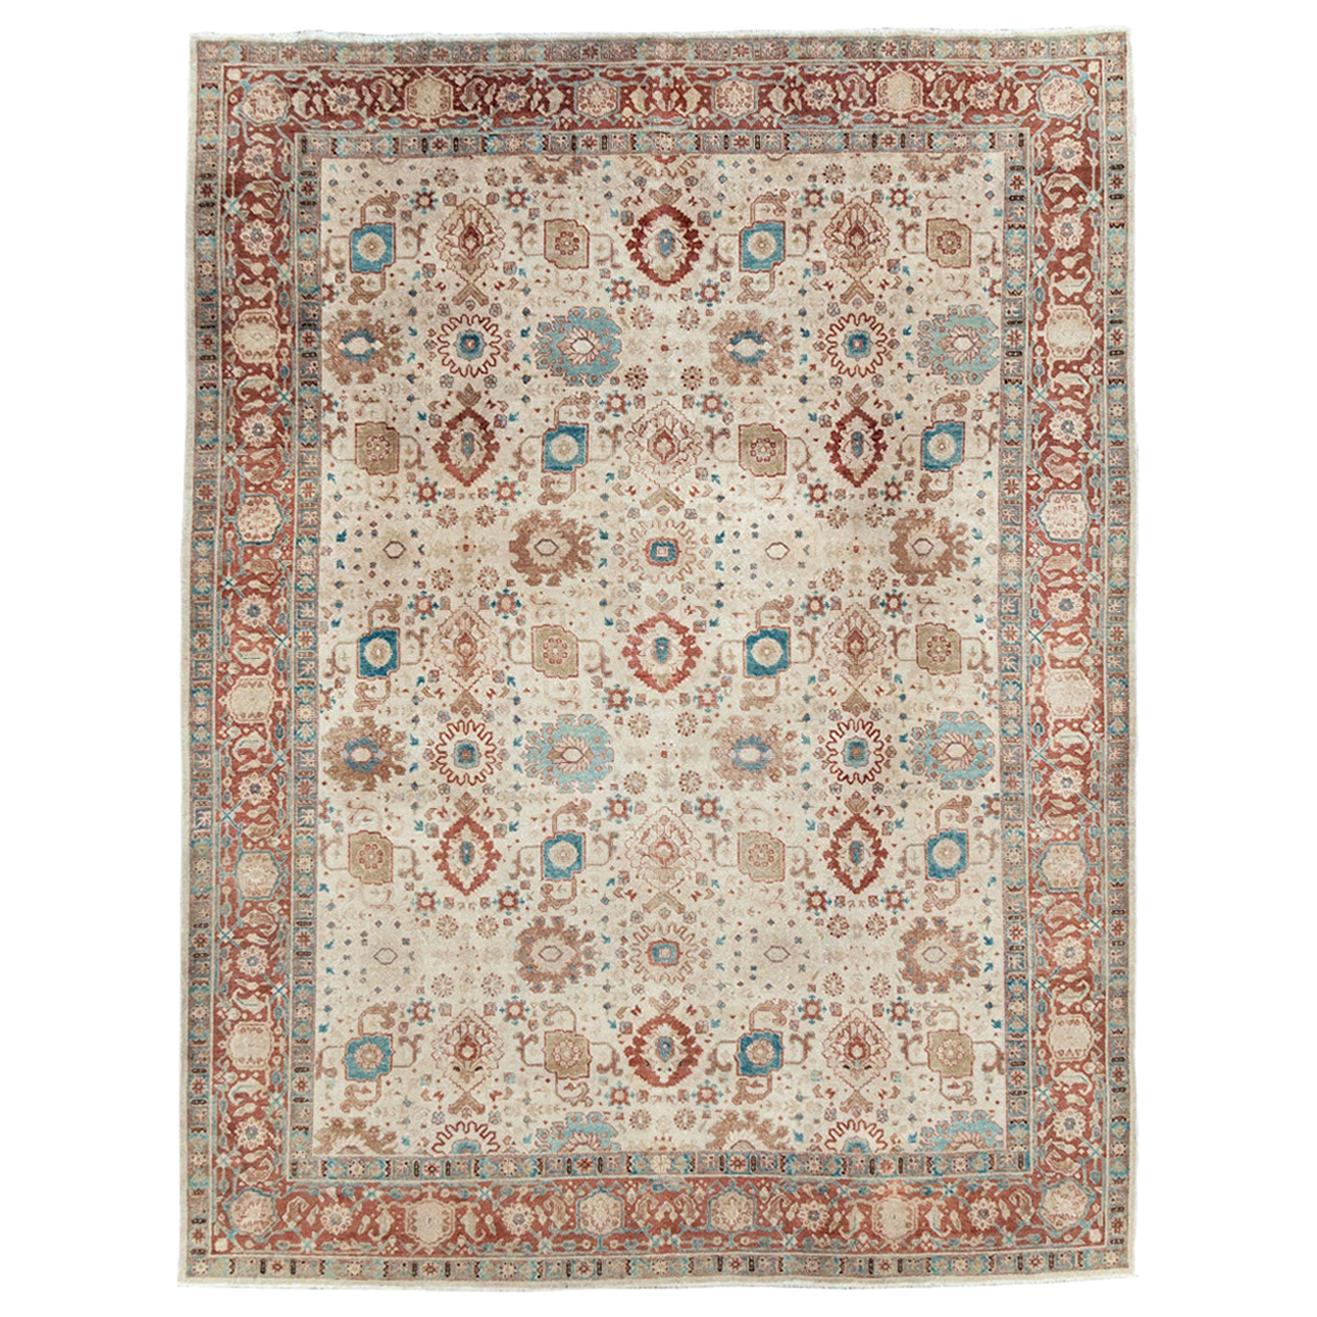 Early 20th Century Persian Room Size Carpet in Cream, Brick Red, & Blue-Green